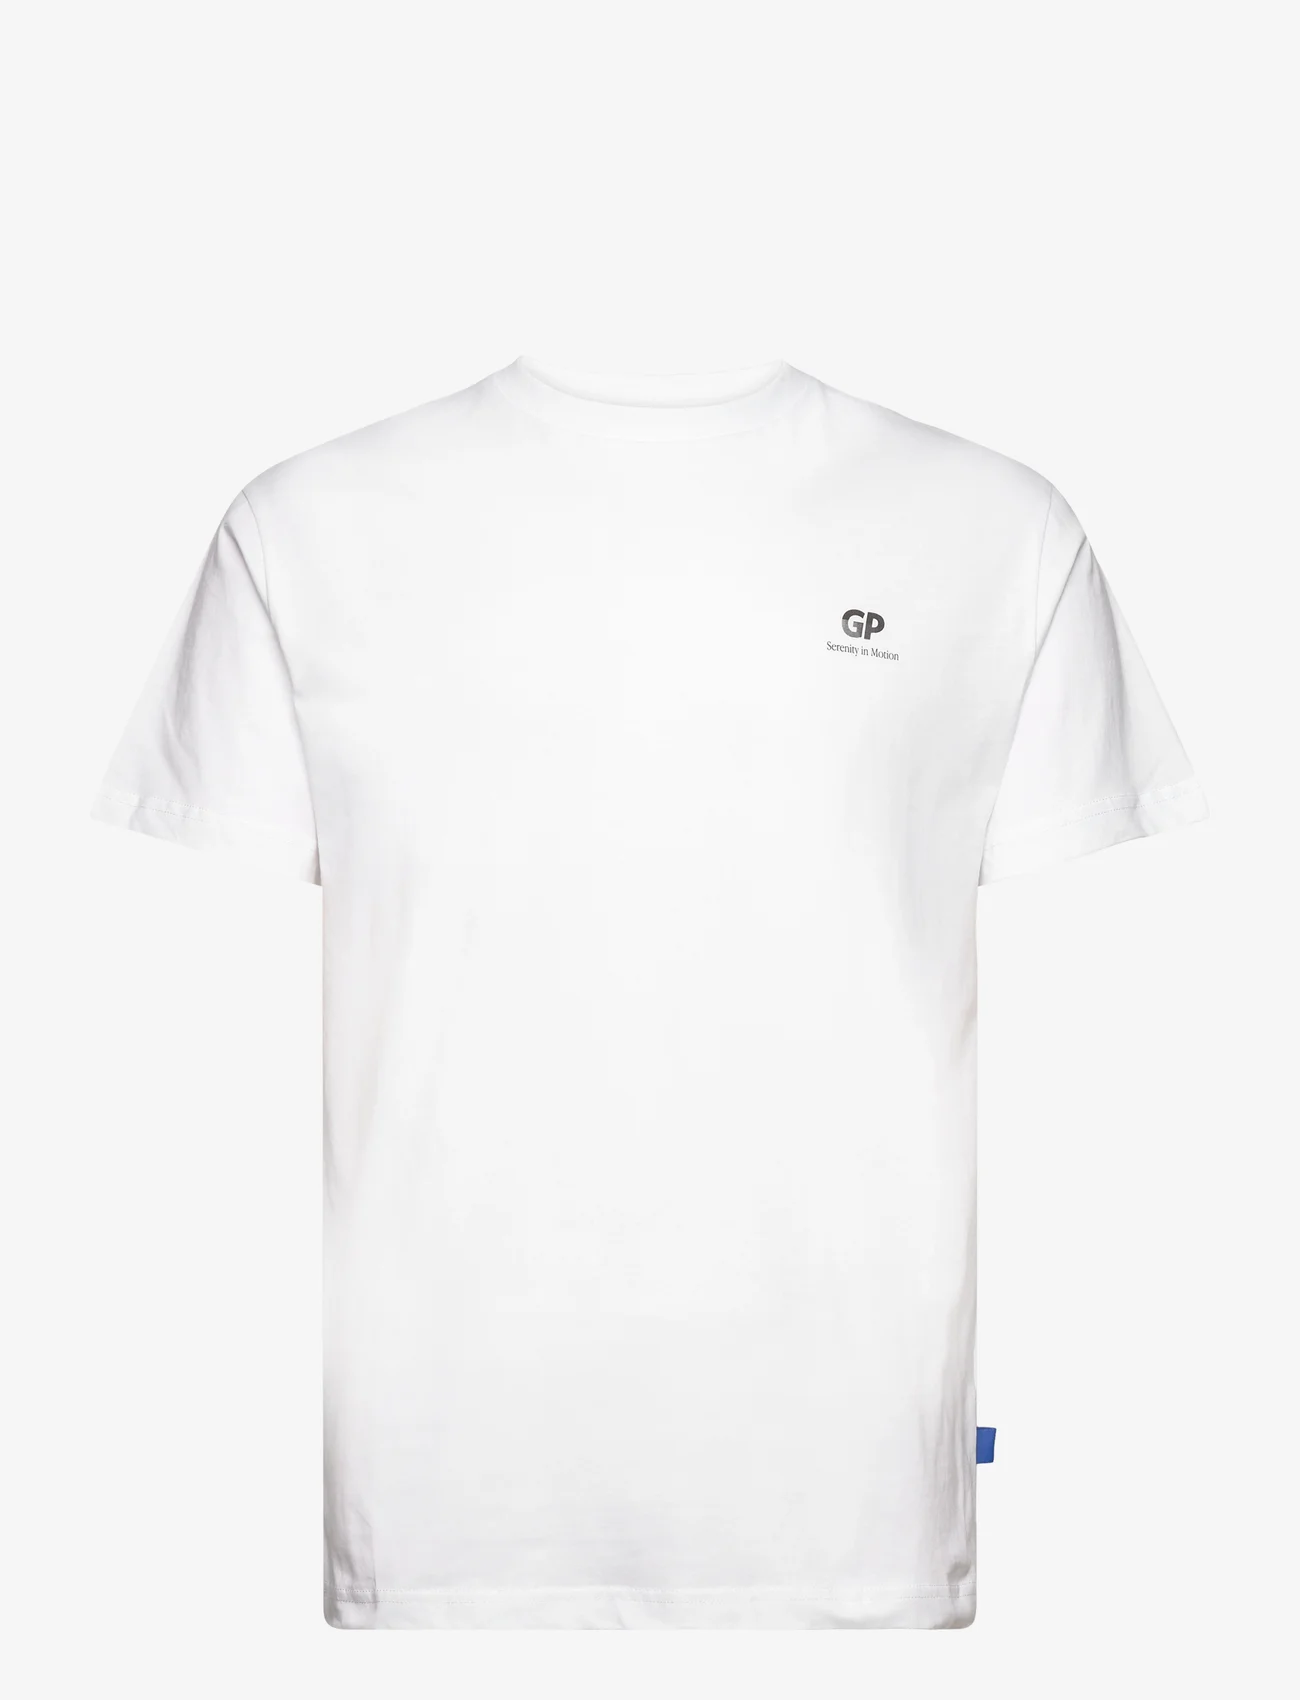 Garment Project - Relaxed Fit Tee - White / Serenity in motion - short-sleeved t-shirts - white - 0